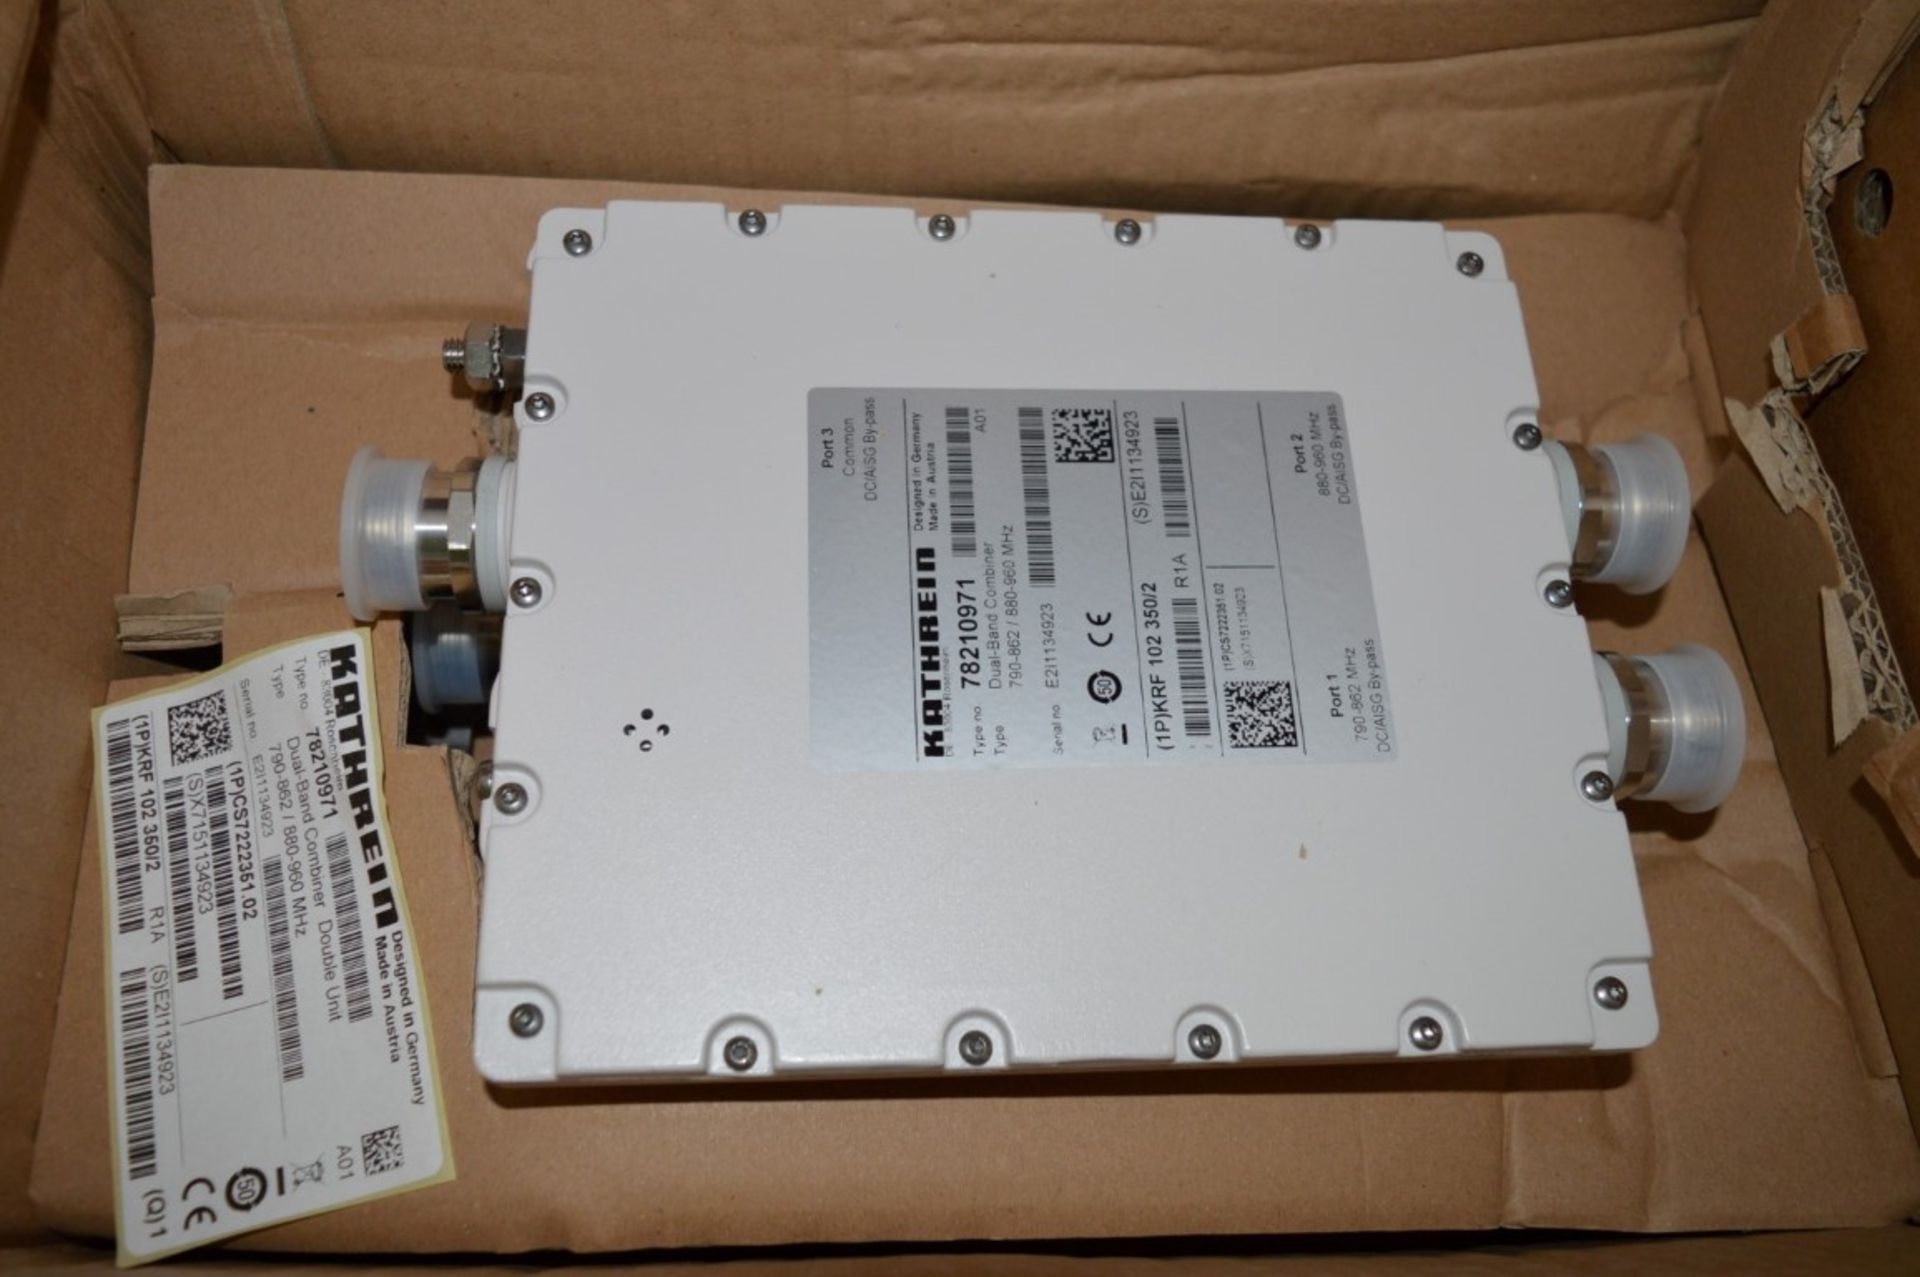 1 x Kathrein Dual Band Combiner Unit - Type 78210971 - 790-862 MHz LTE 800 / 880-960 MHz GSM 900 - U - Image 7 of 7